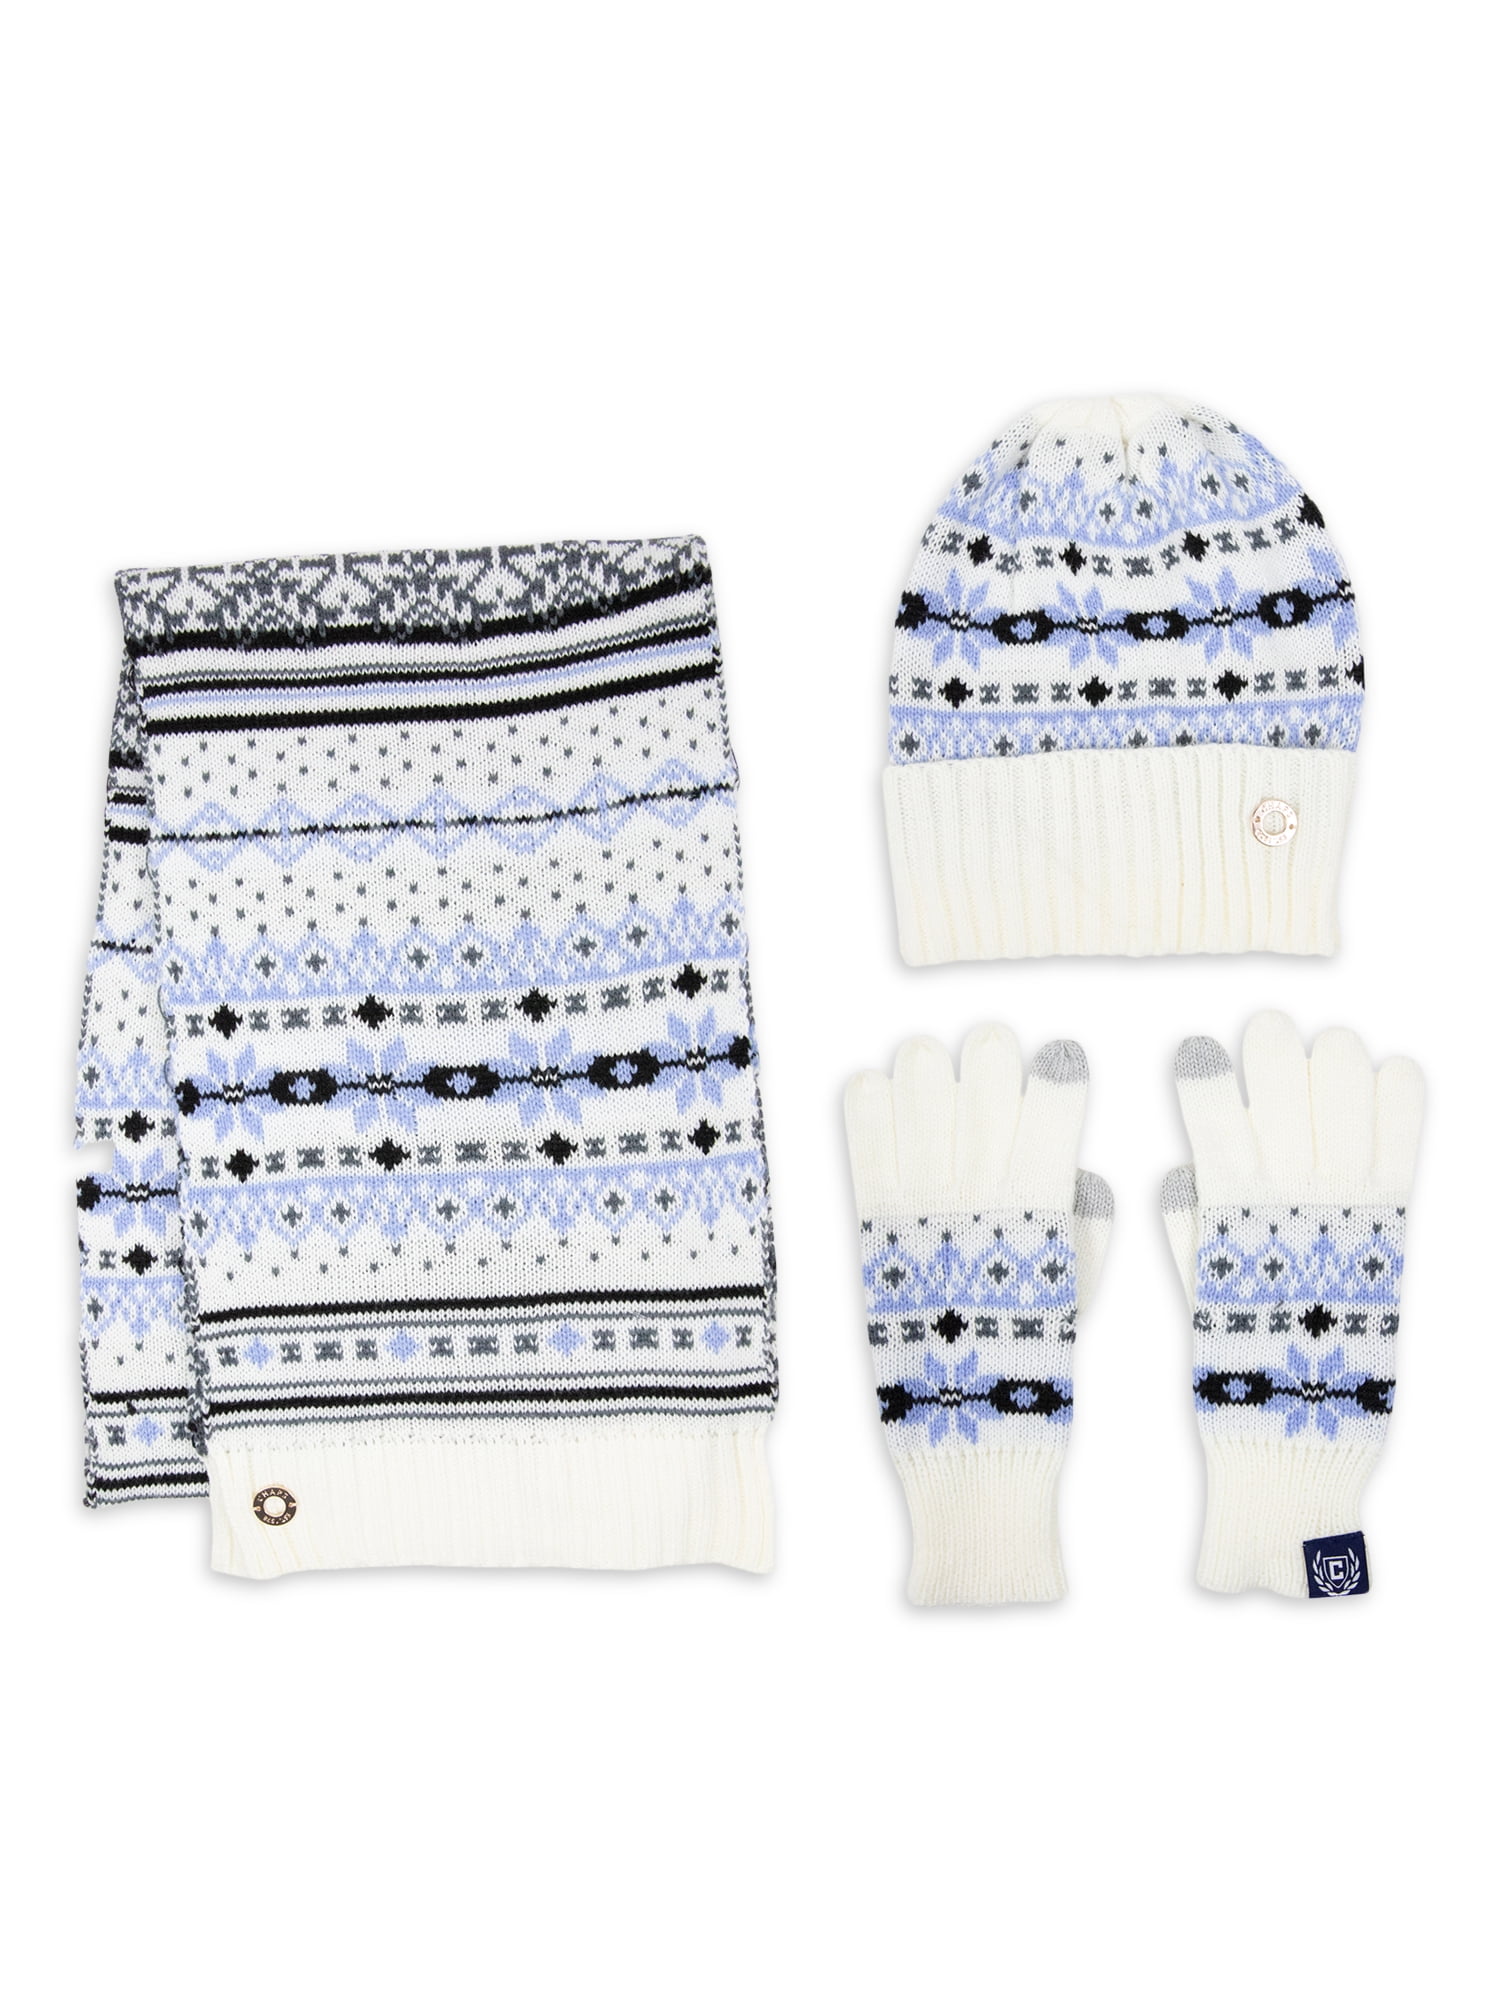 Chaps Brand Women\'s Fairisle Knit 3 Piece Scarf, Beanie Style Hat and Glove  Set, Adult | Beanies